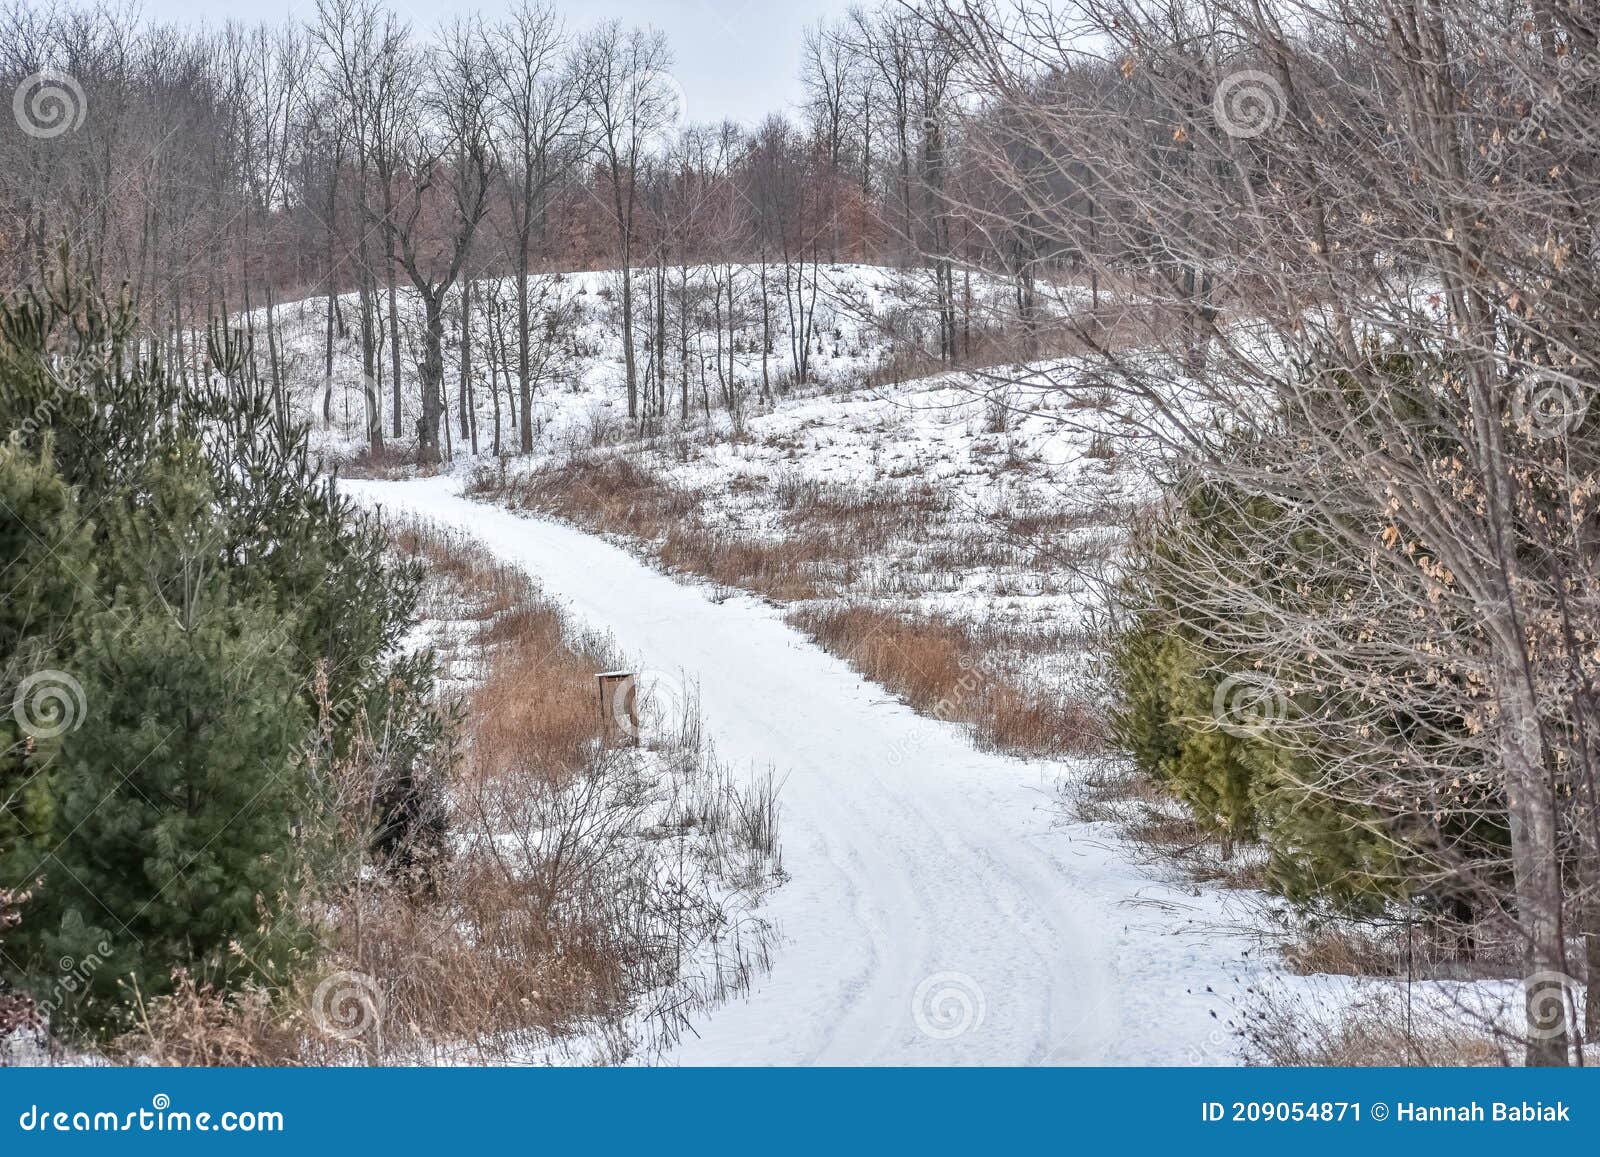 snow covered pathway through nature conservancy